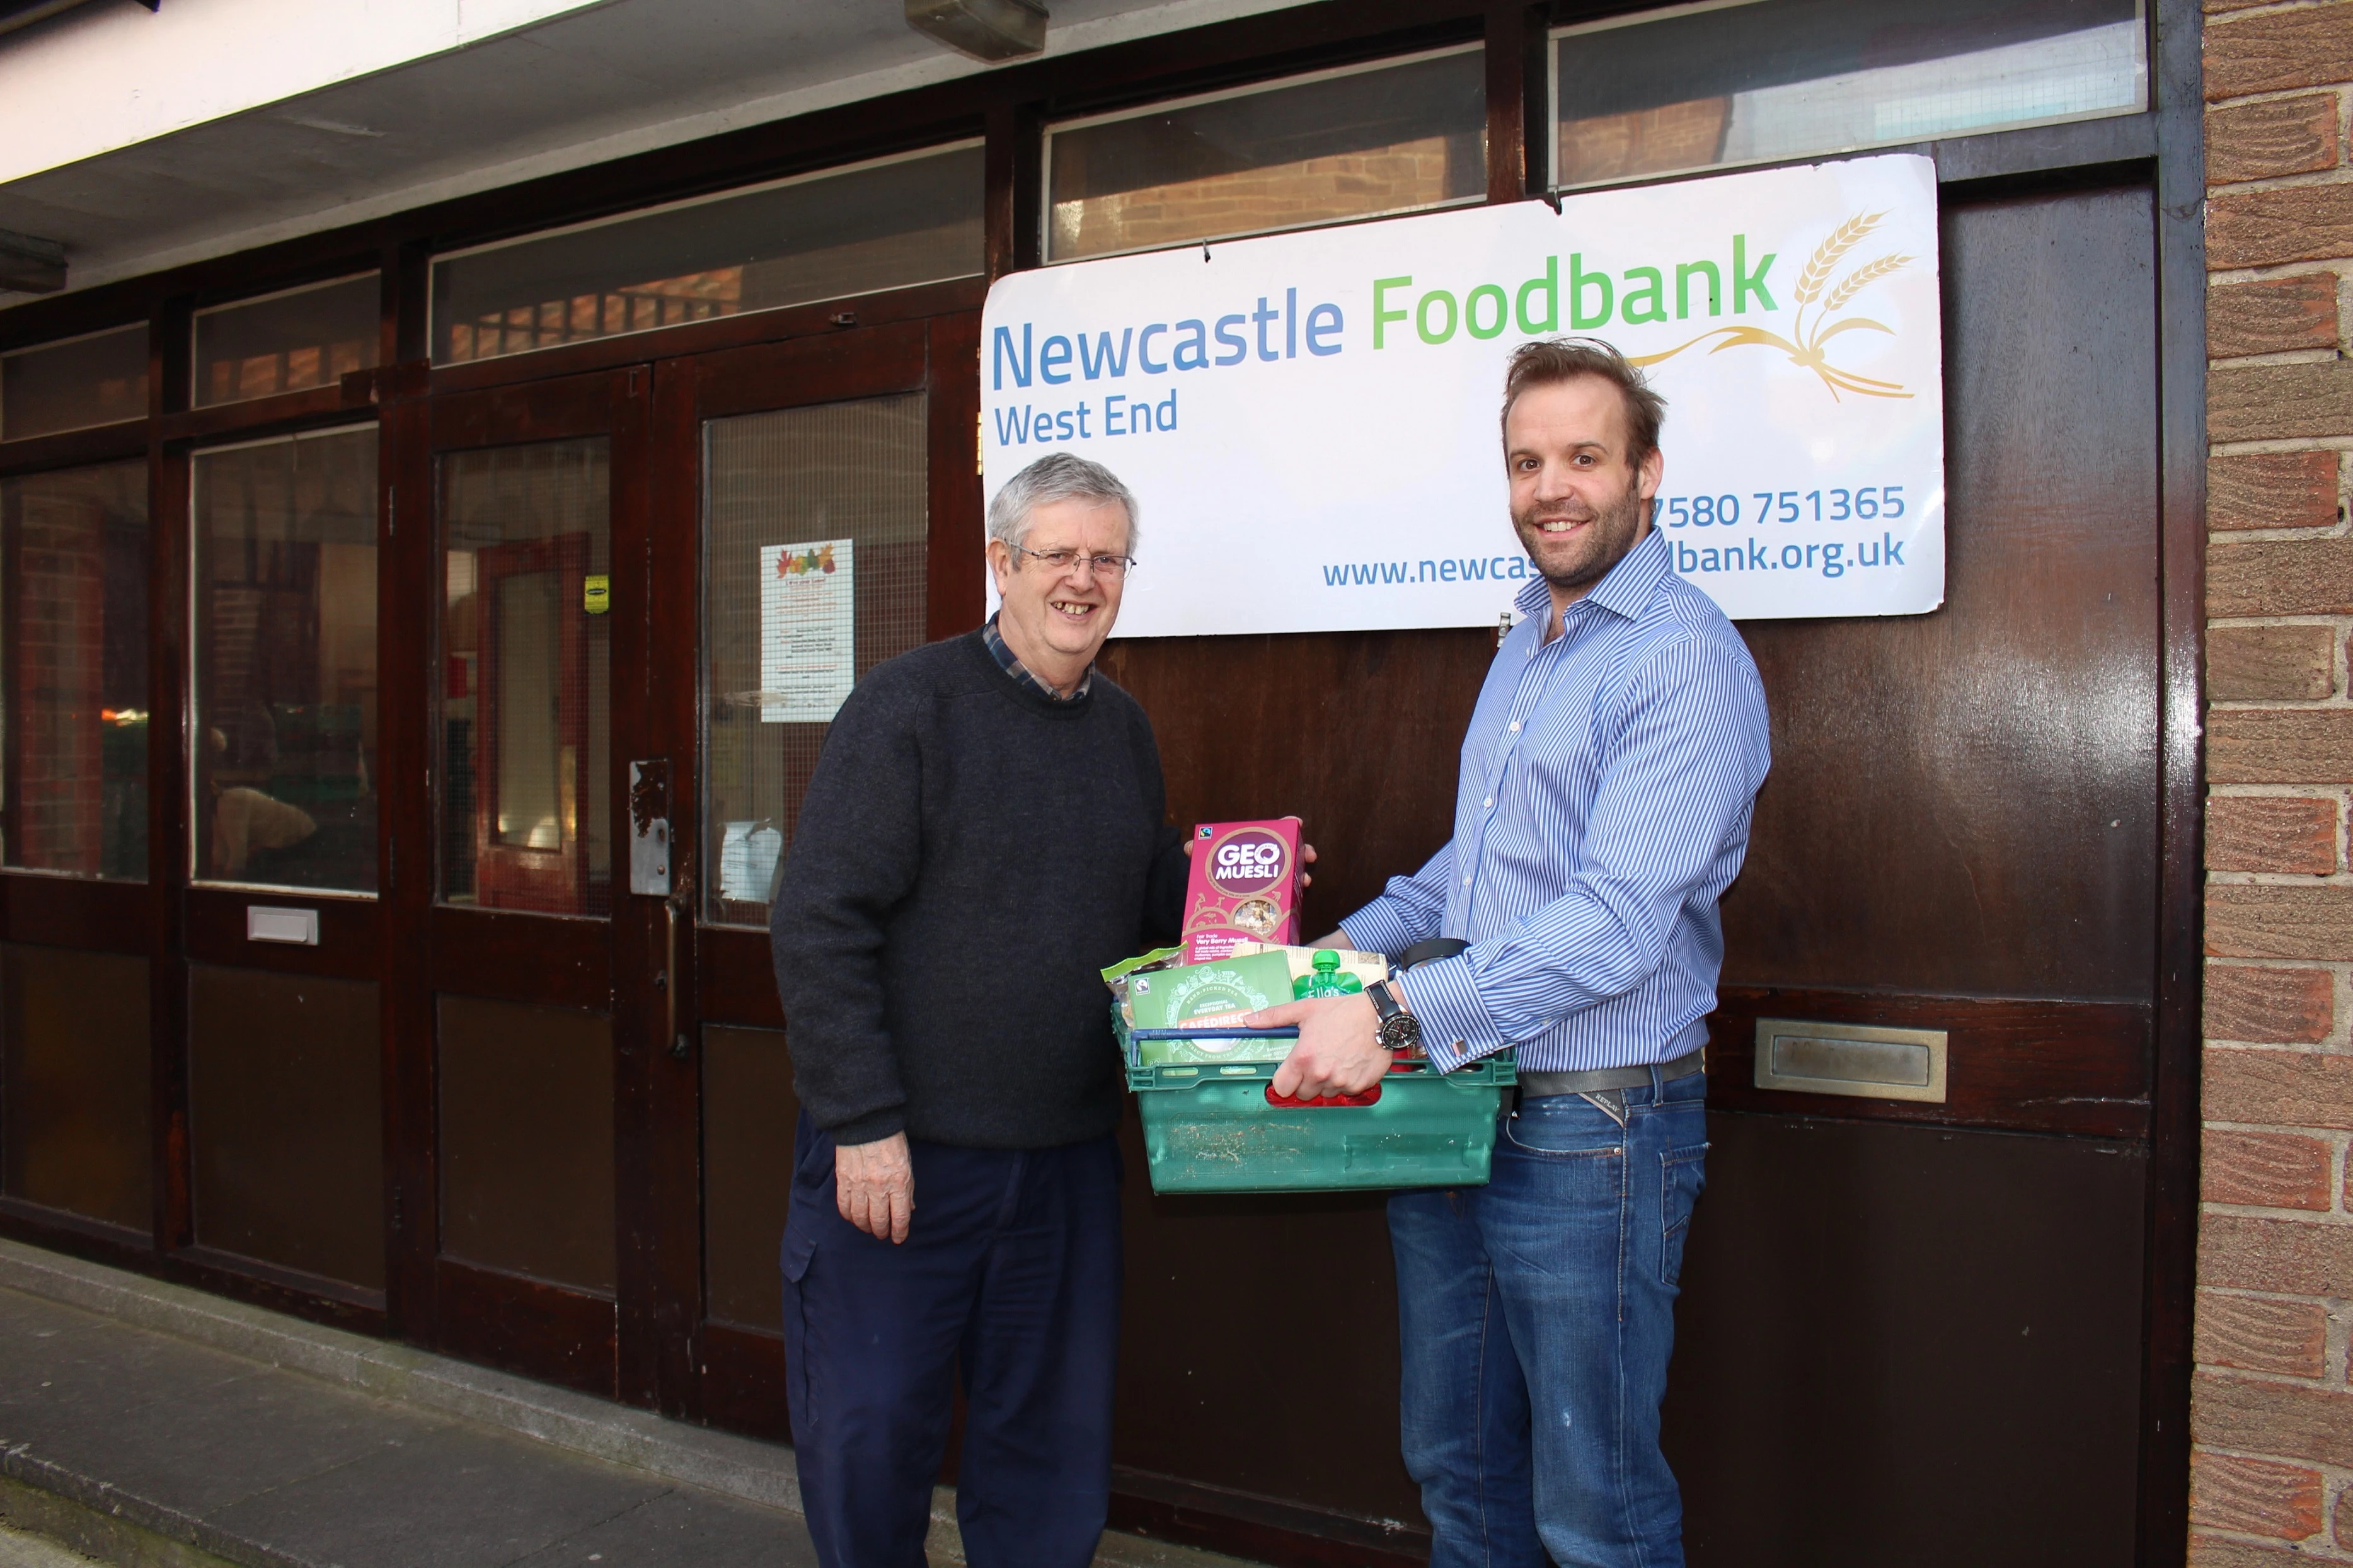 Newcastle Foodbank manager Michael Nixon and Ethical Superstore's Peter Leatherland